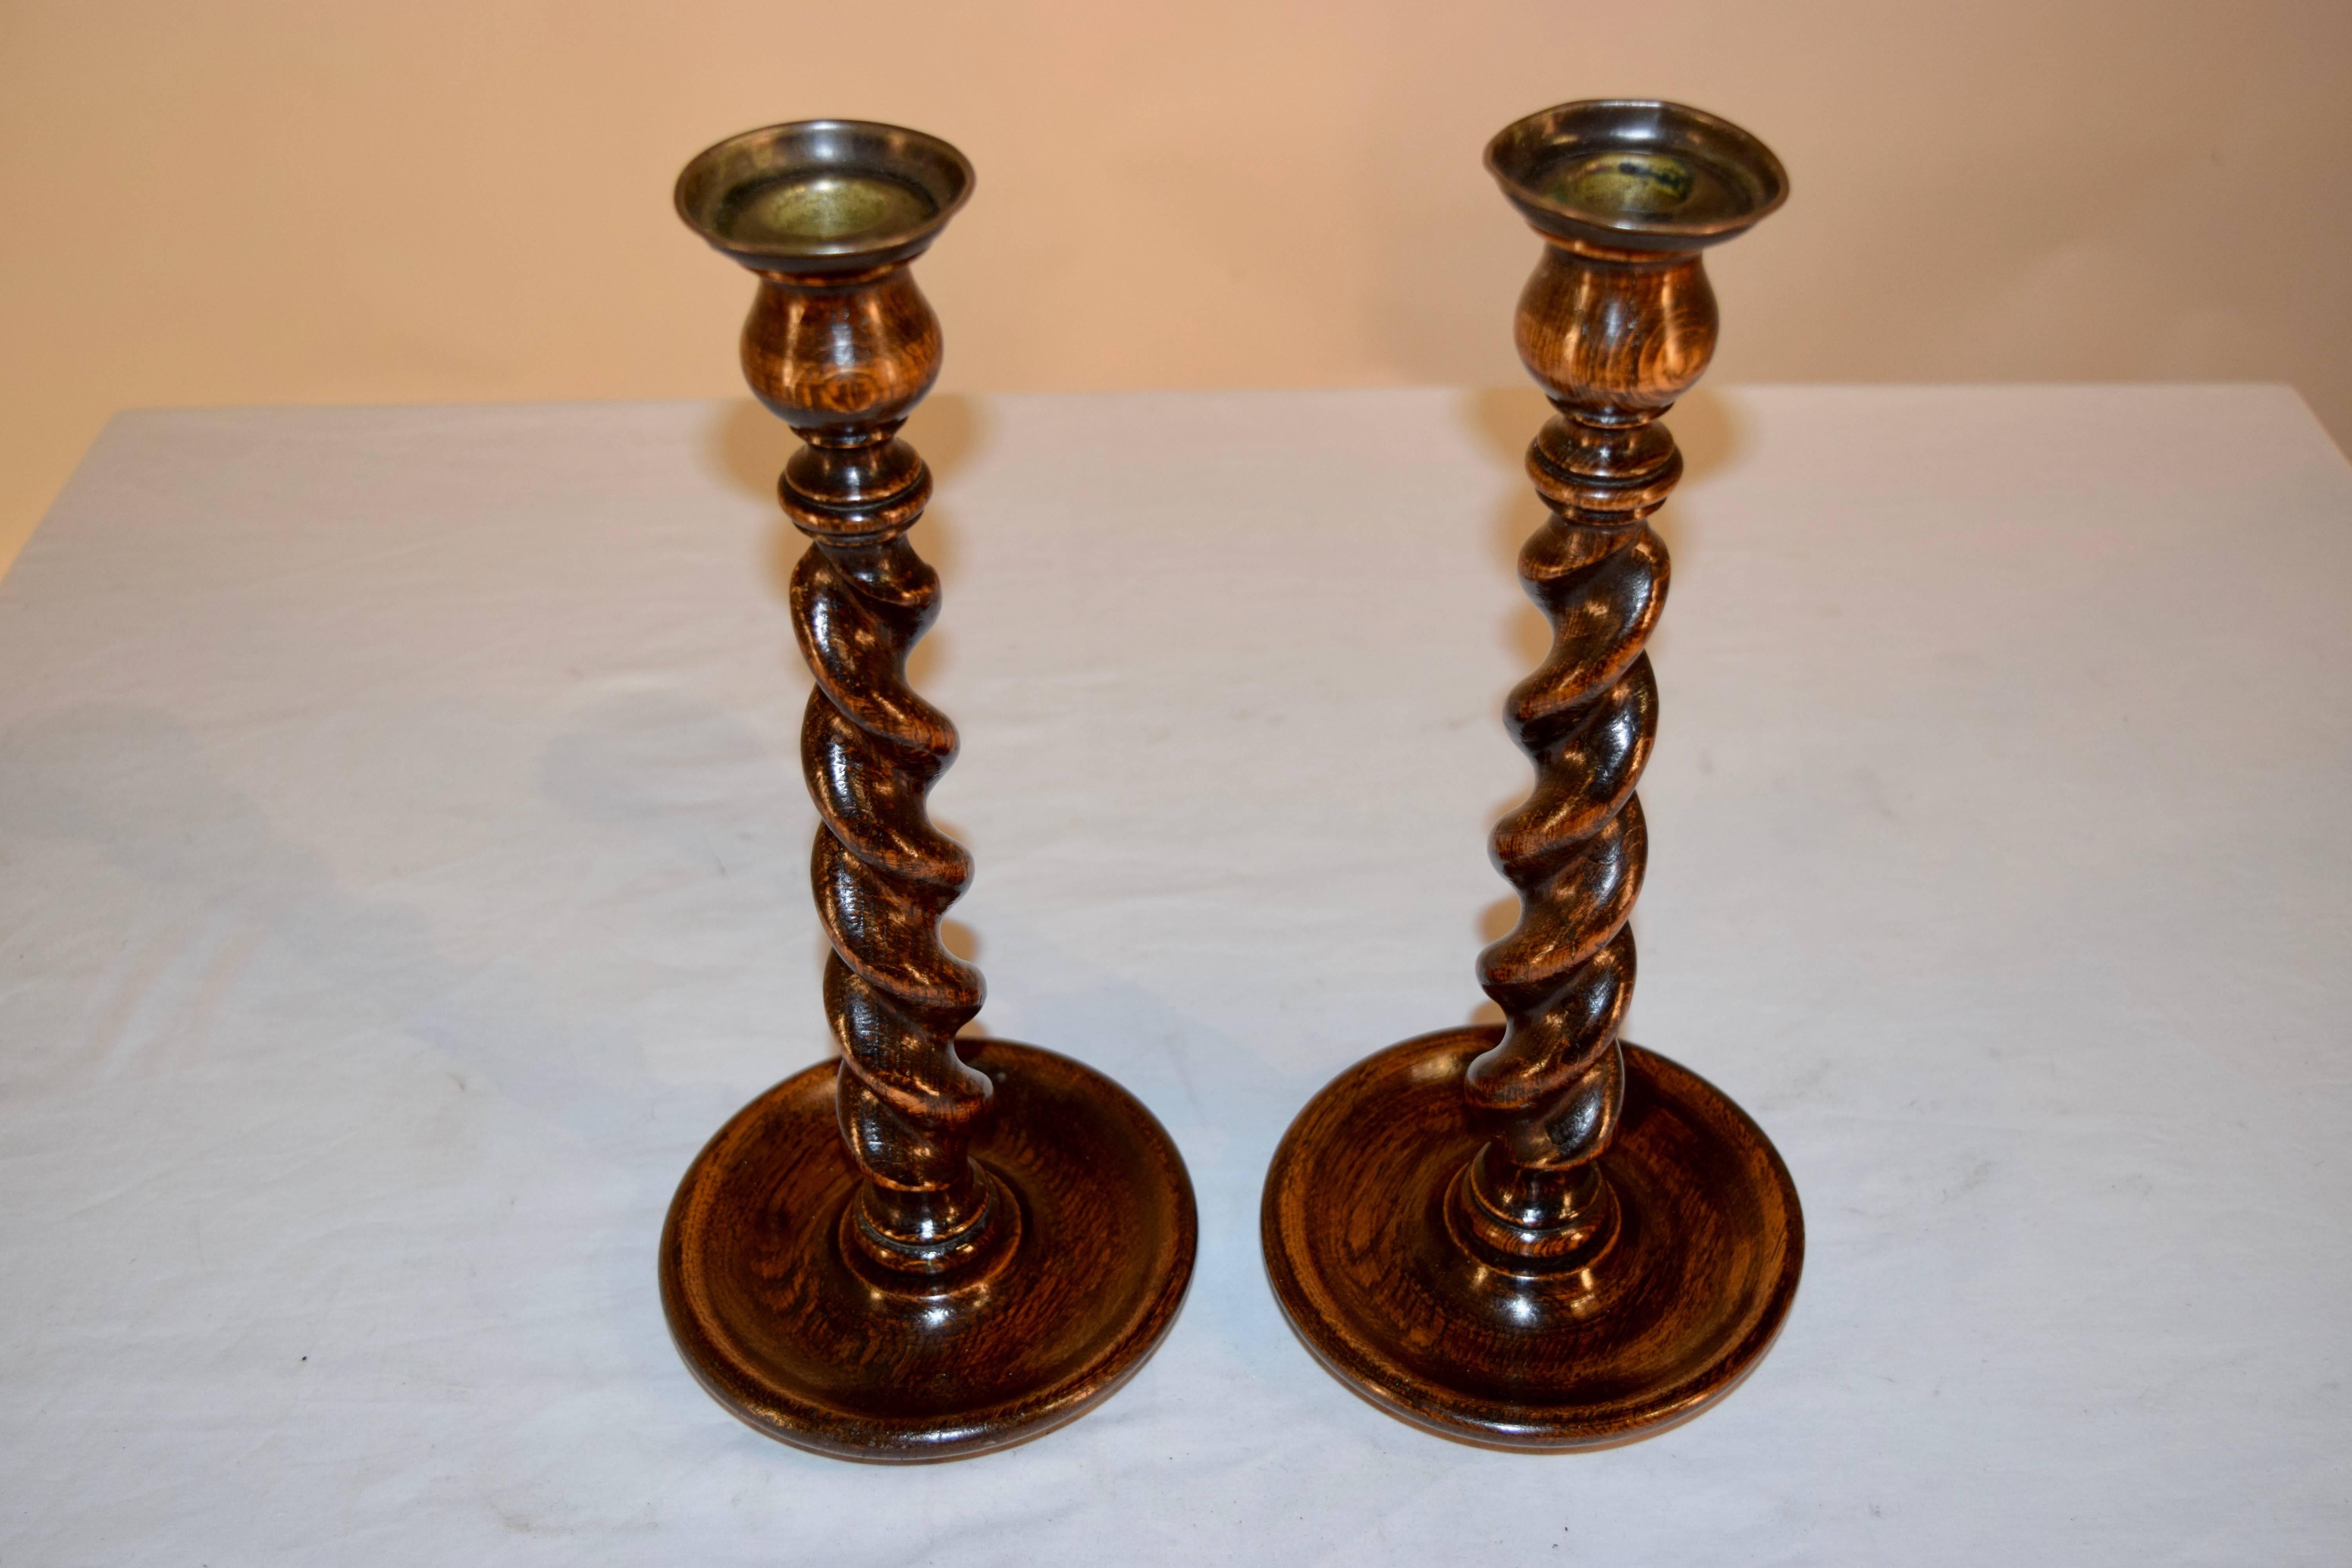 19th century pair of hand-turned candlesticks with original brass bobeches, following down to hand-turned tulip shaped candle cups, over a hand-turned neck and barley twist stems. Supported on hand-turned dish bases.